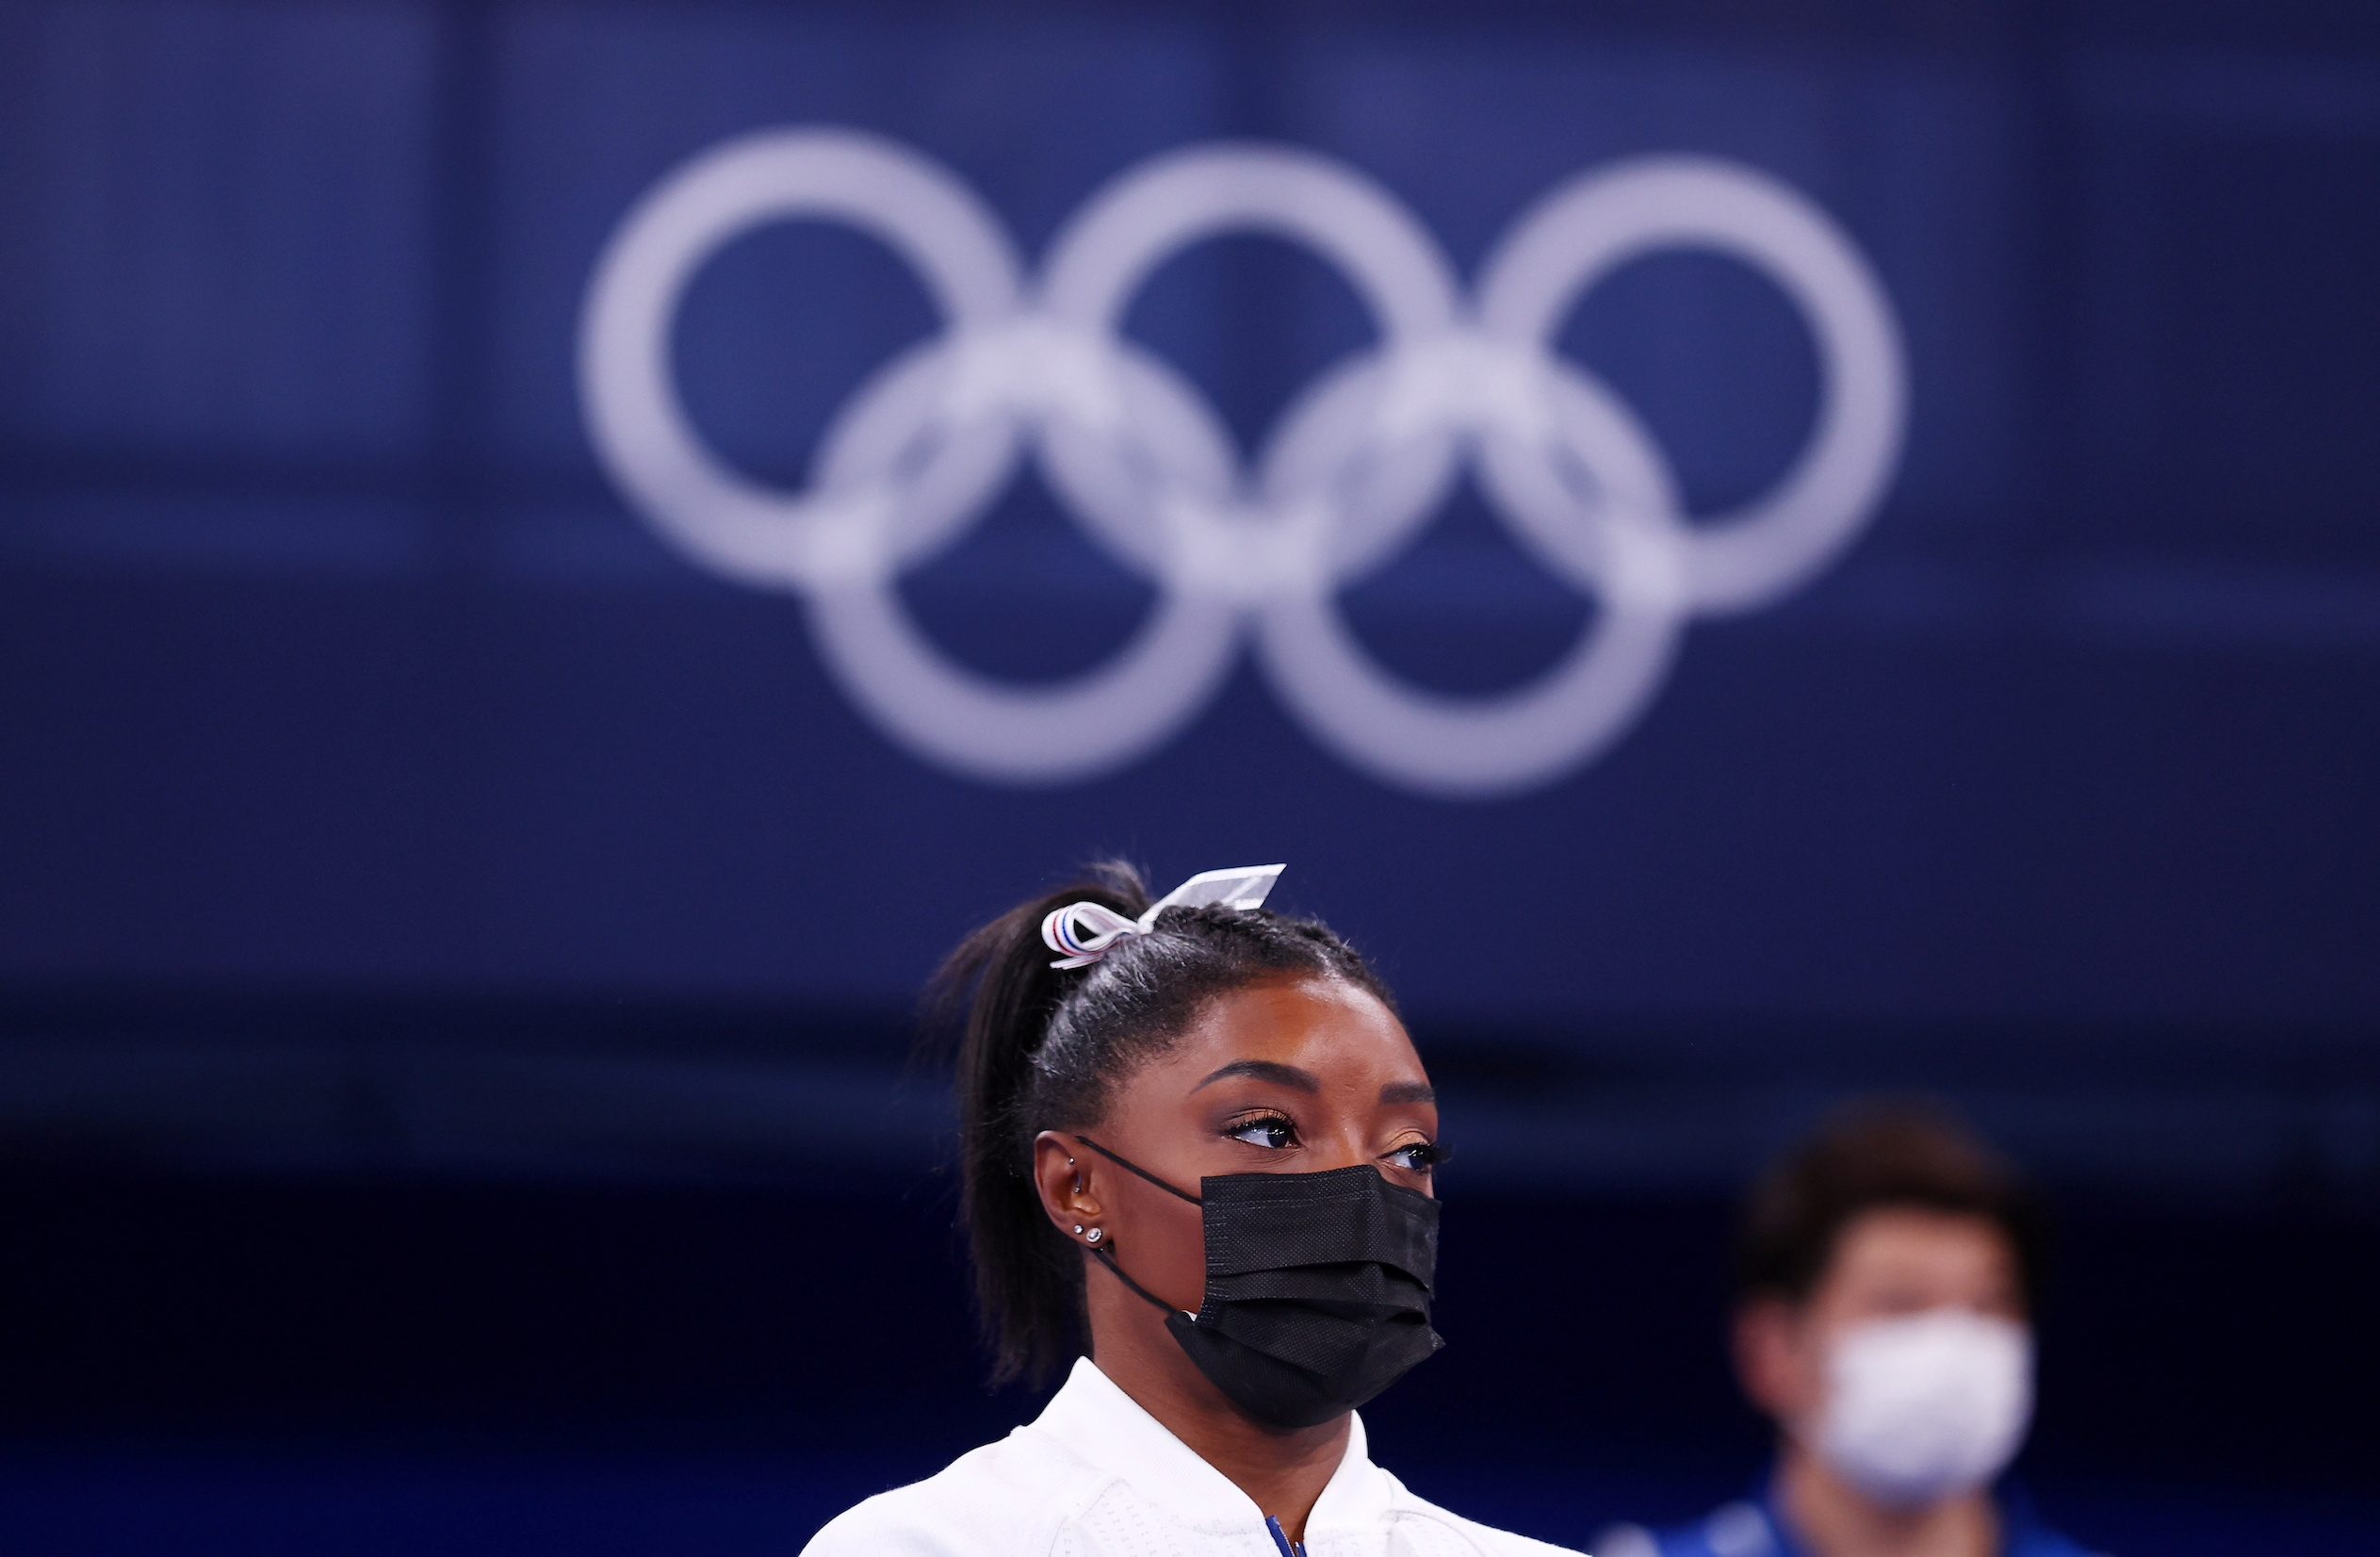 Biles withdraws from event finals for vault and uneven bars